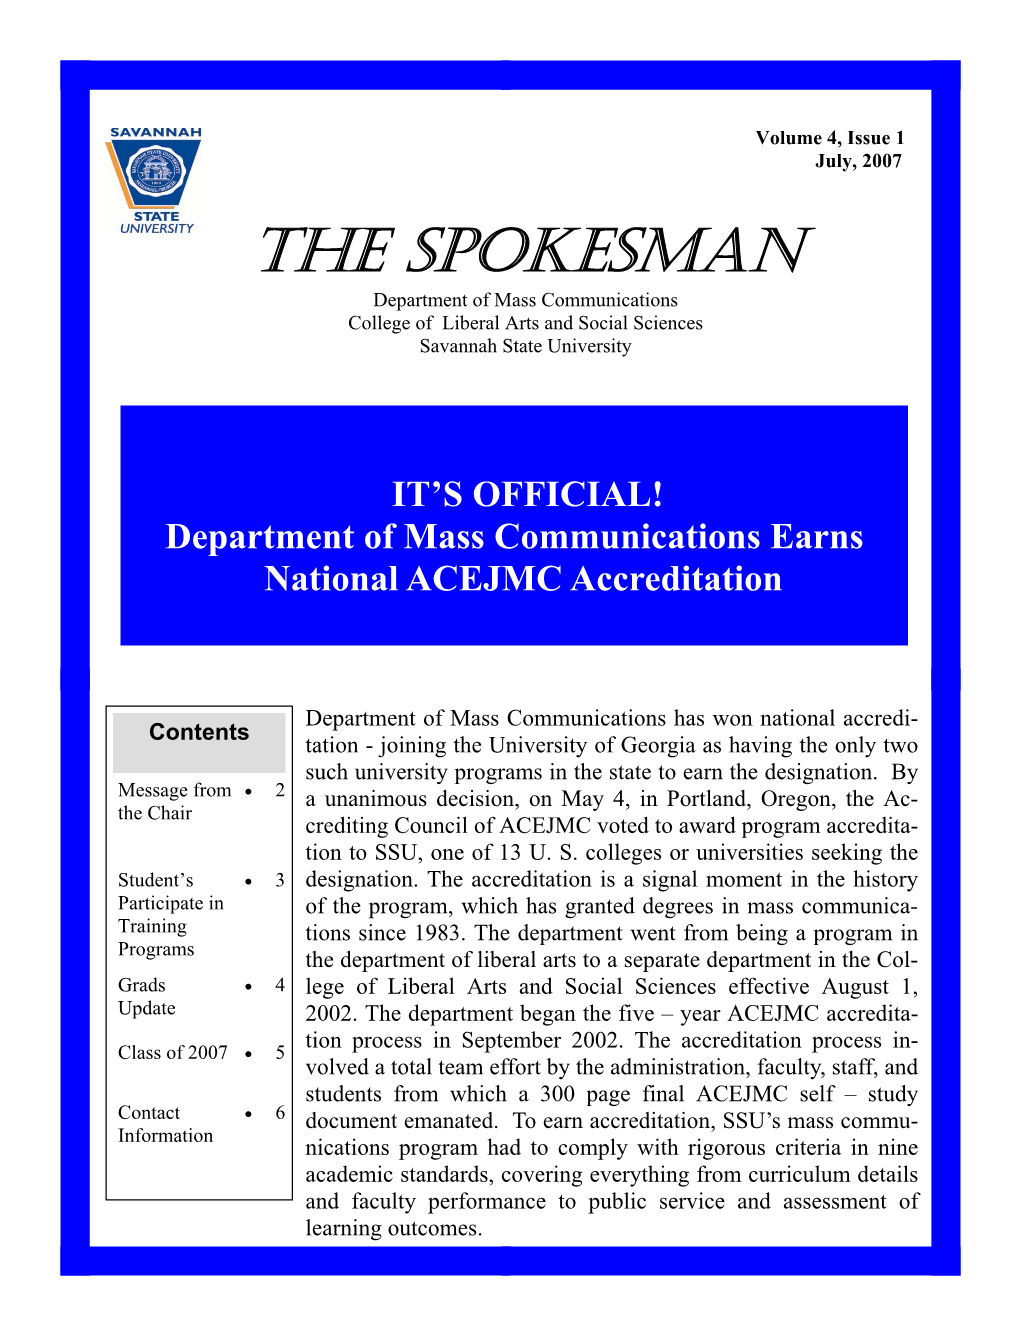 THE SPOKESMAN Department of Mass Communications College of Liberal Arts and Social Sciences Savannah State University